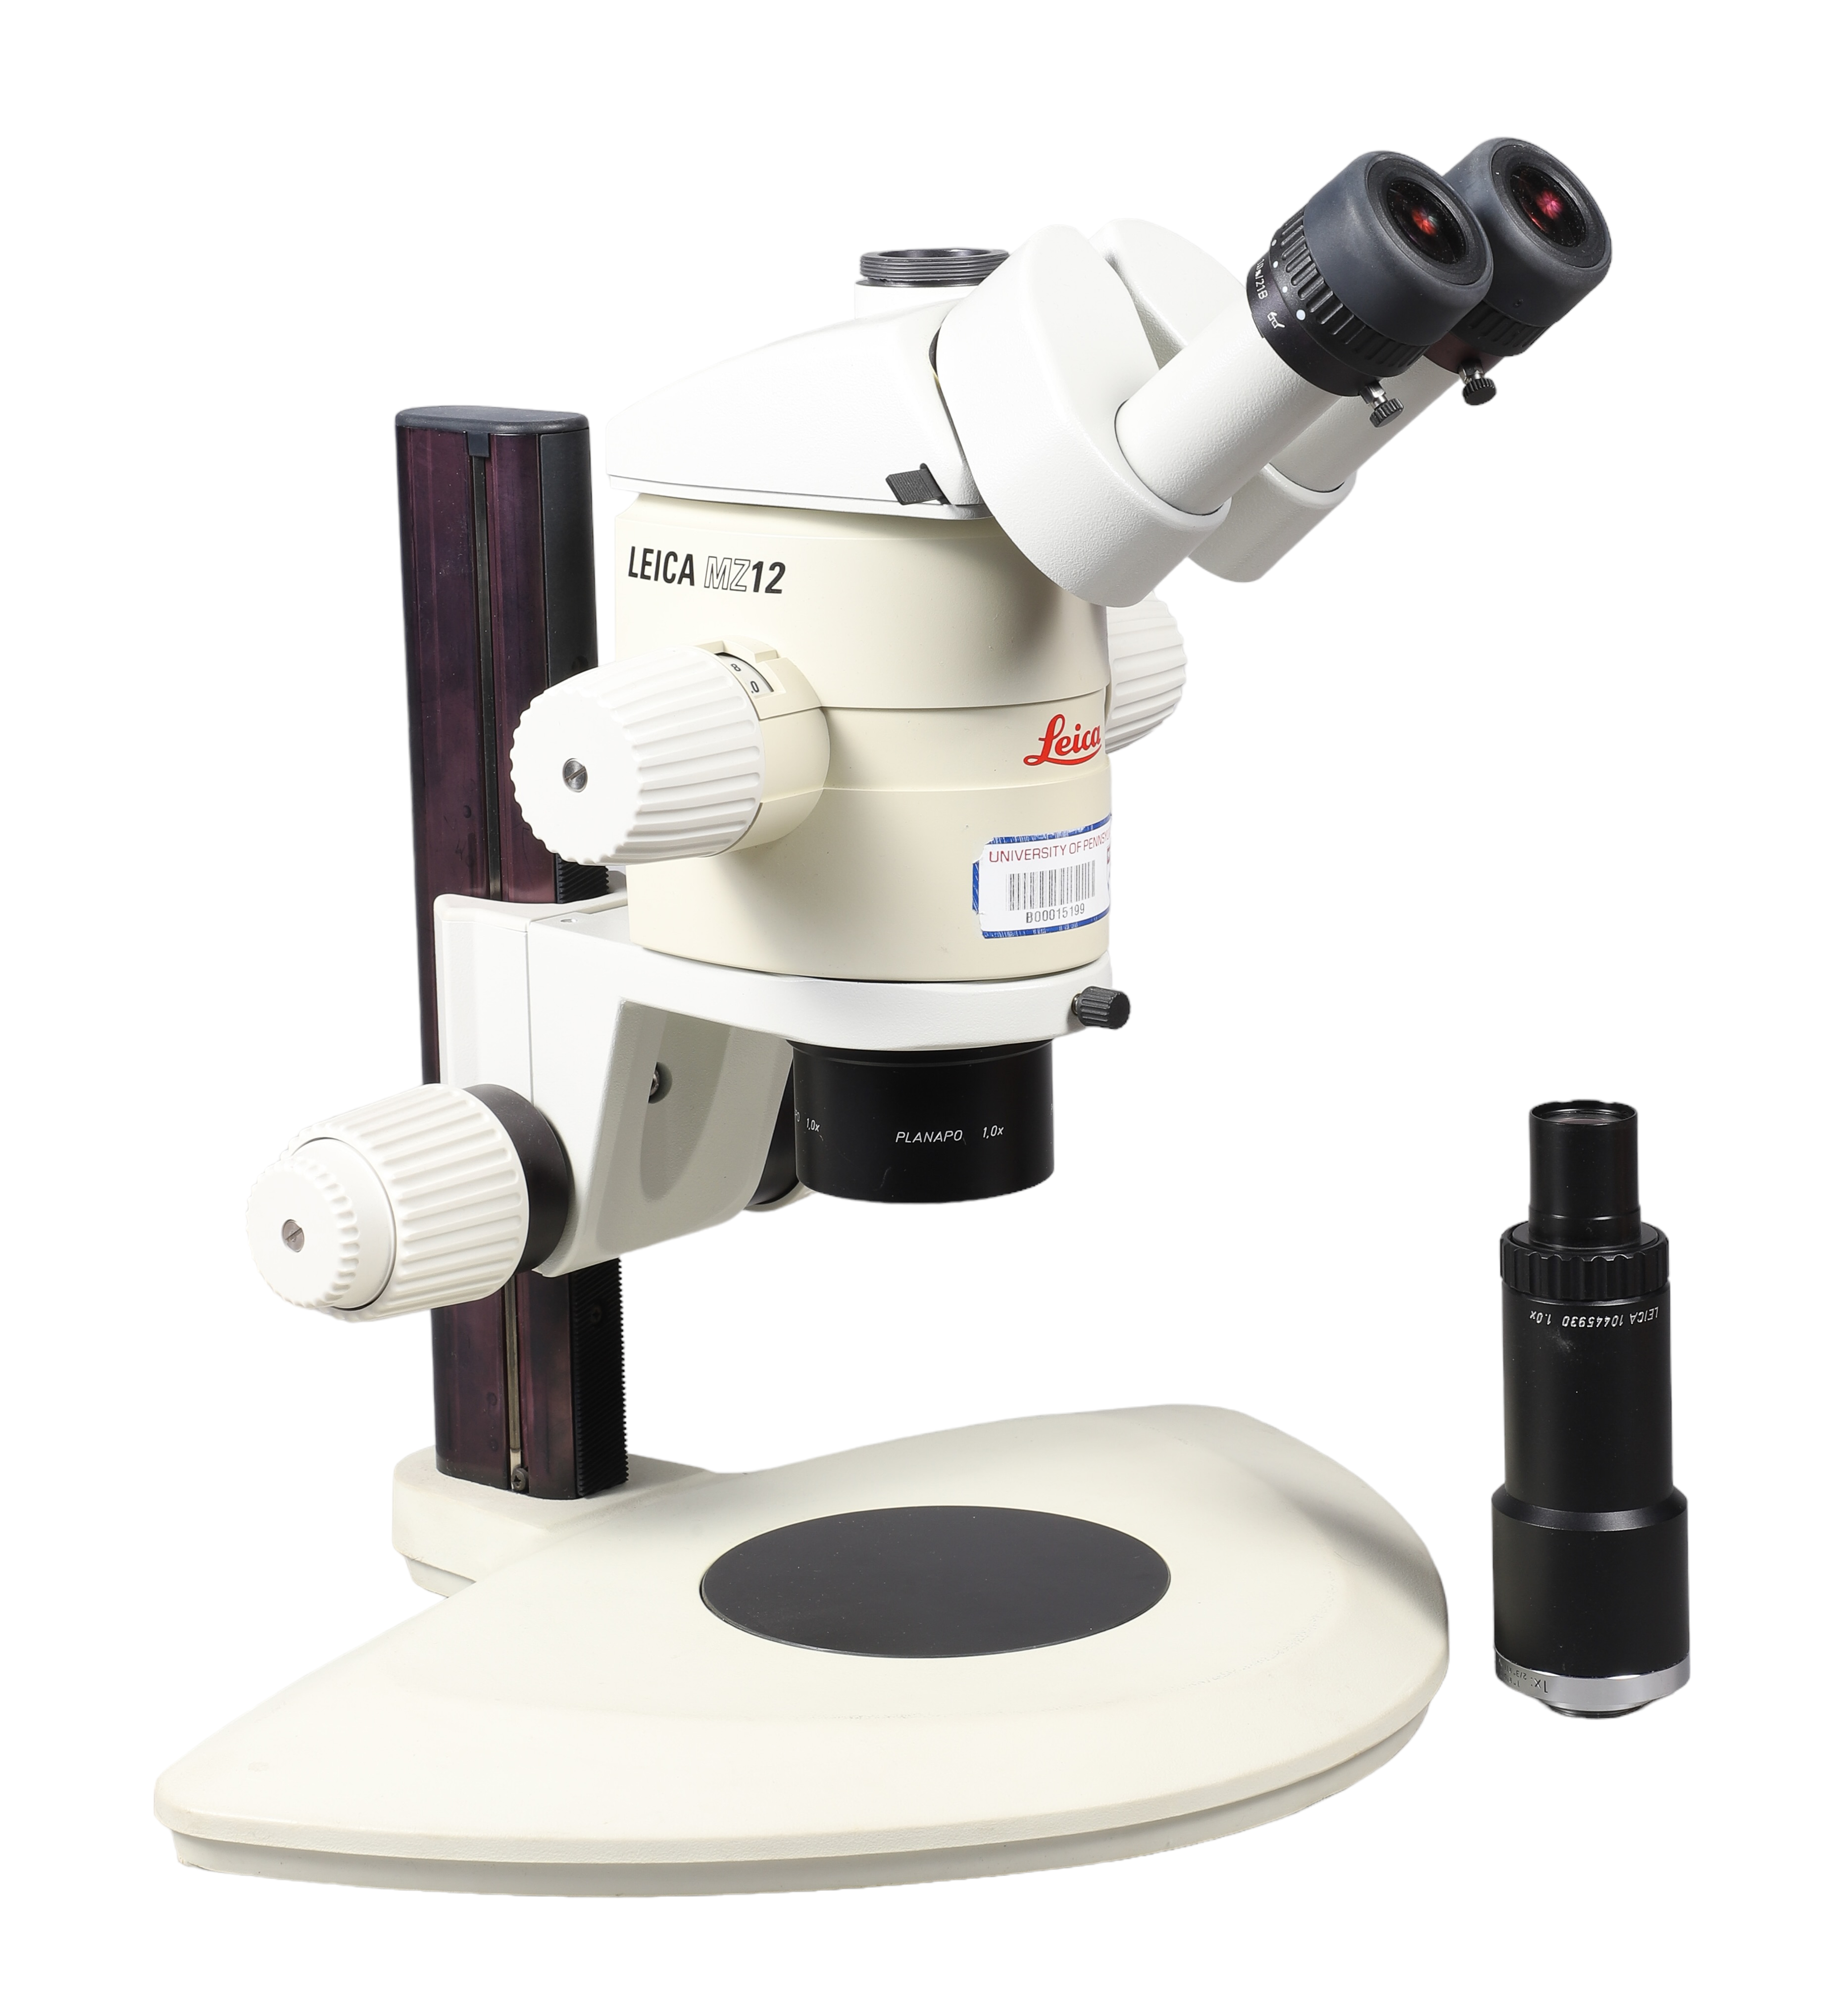 Leica Stereo Microscope MZ12 with 317fcf